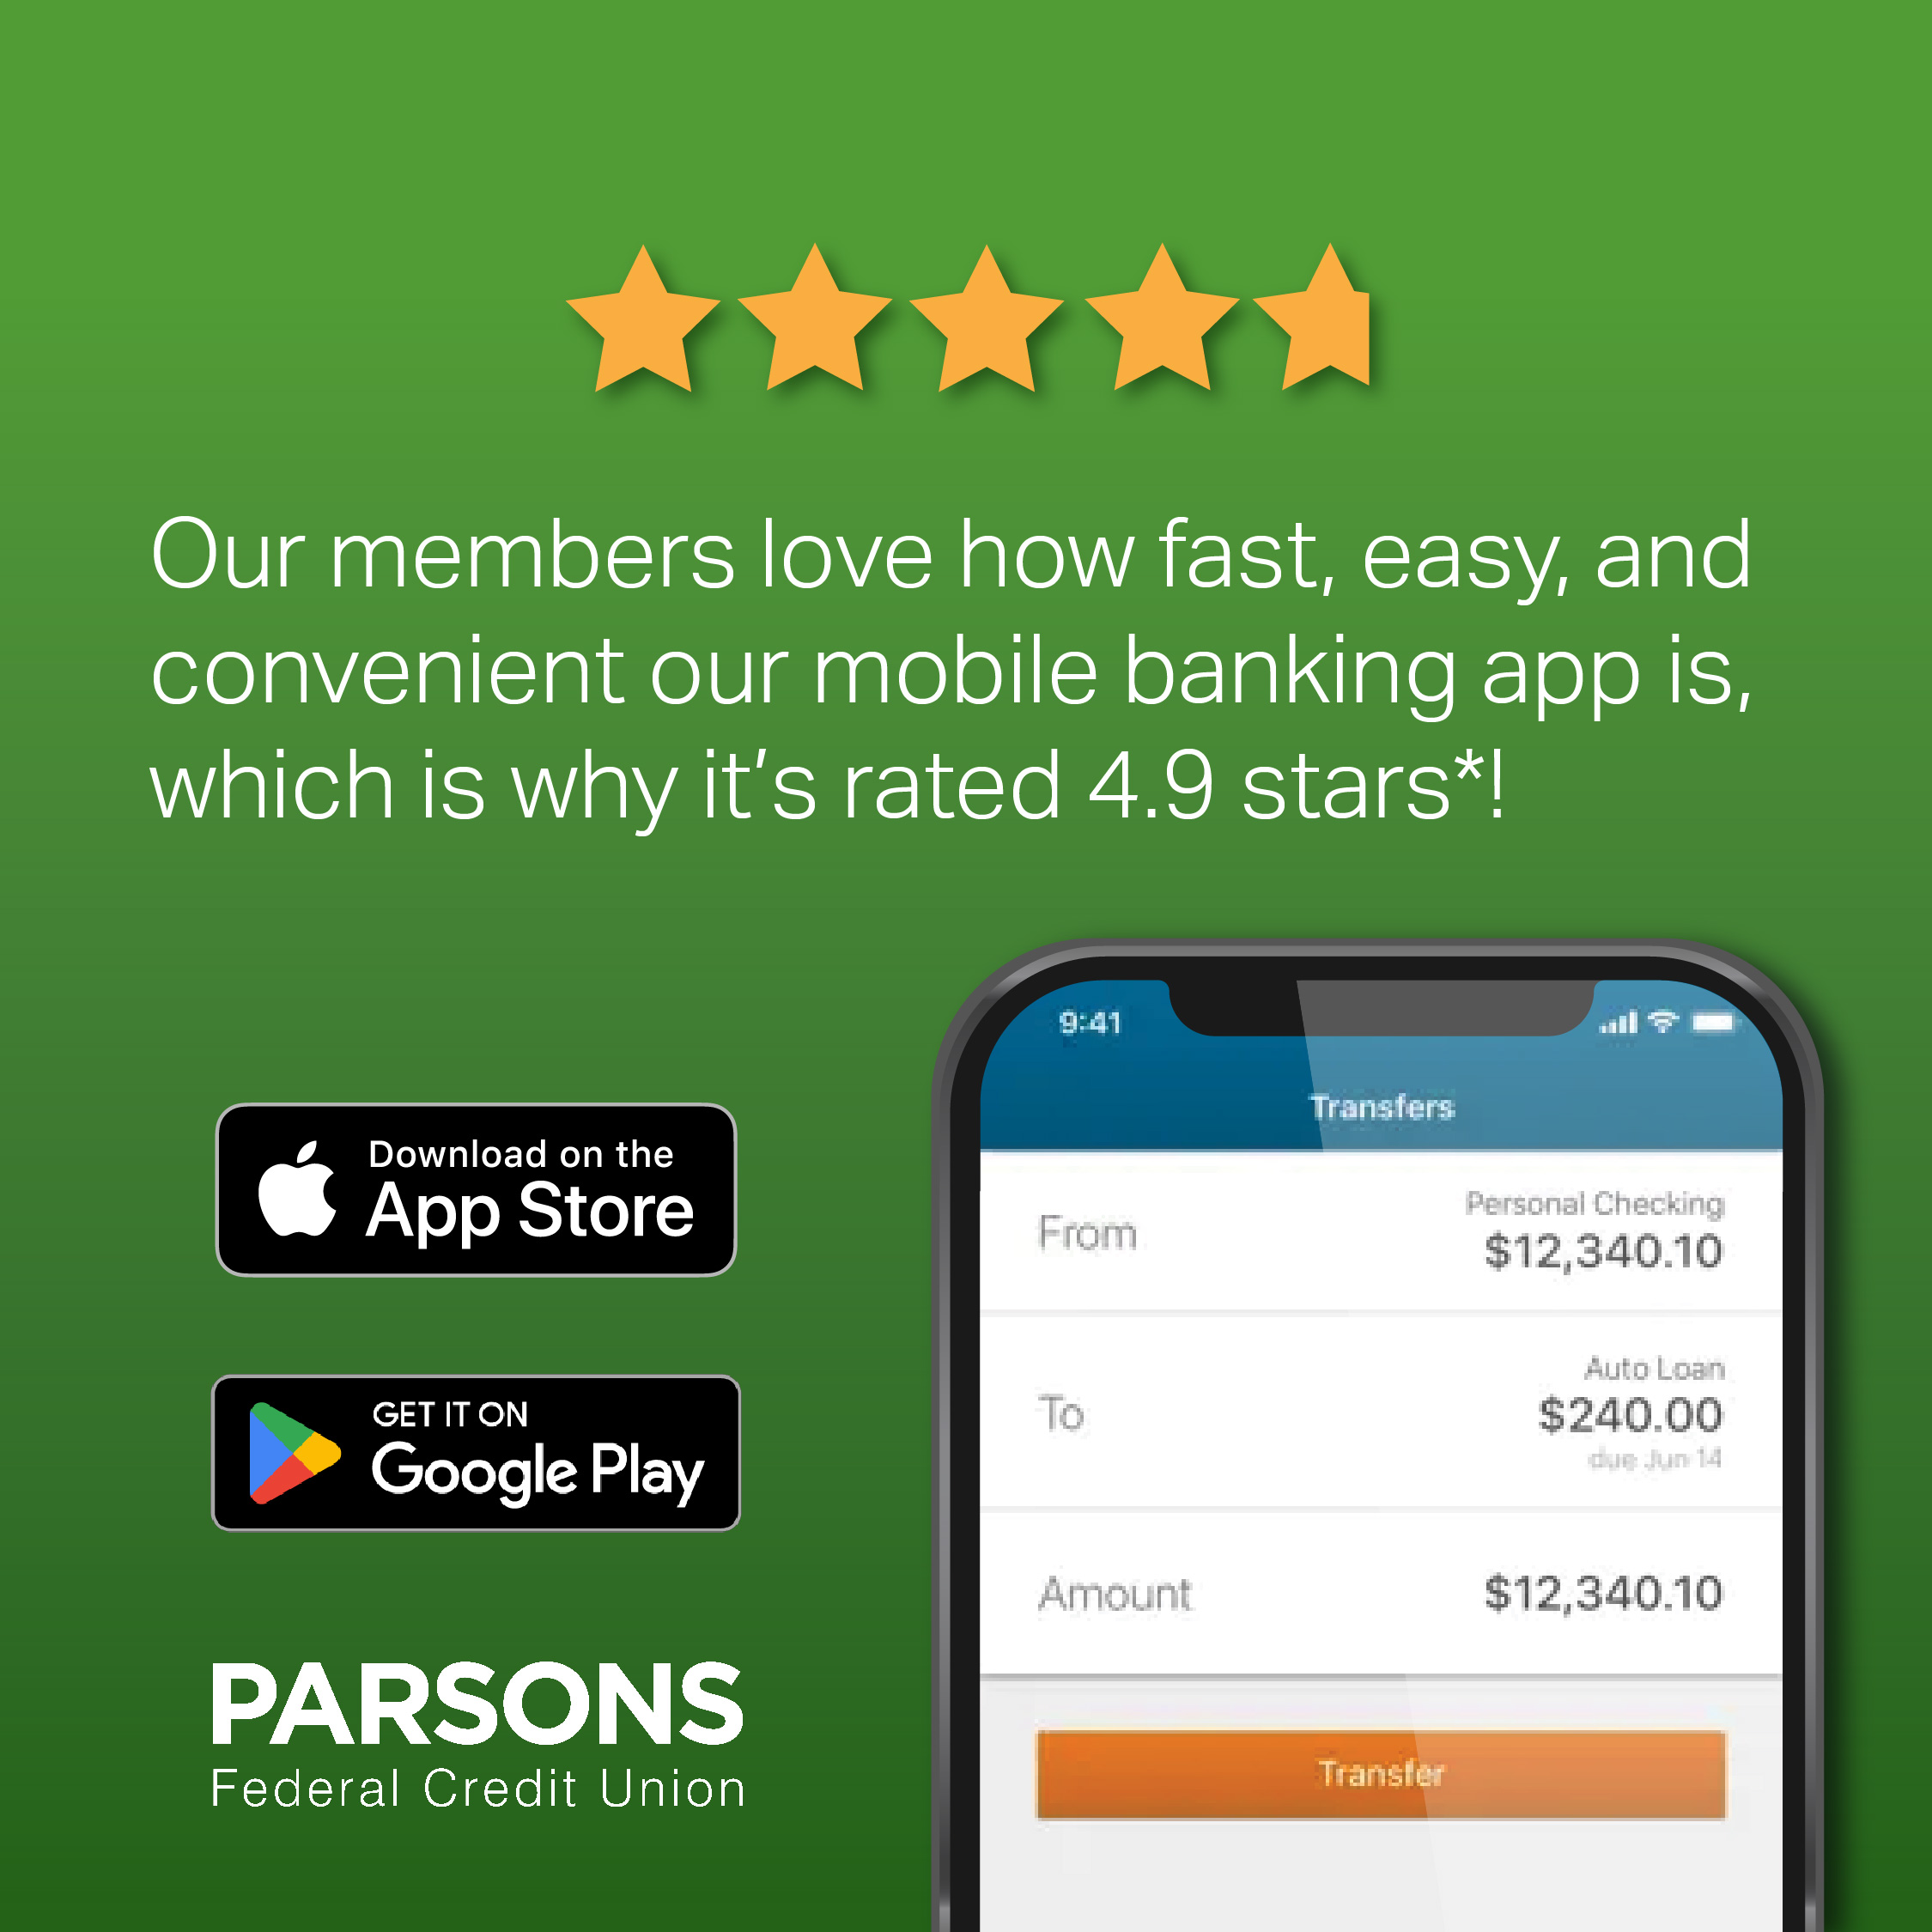 Our members love how fast, easy, and convenient our mobile banking app is